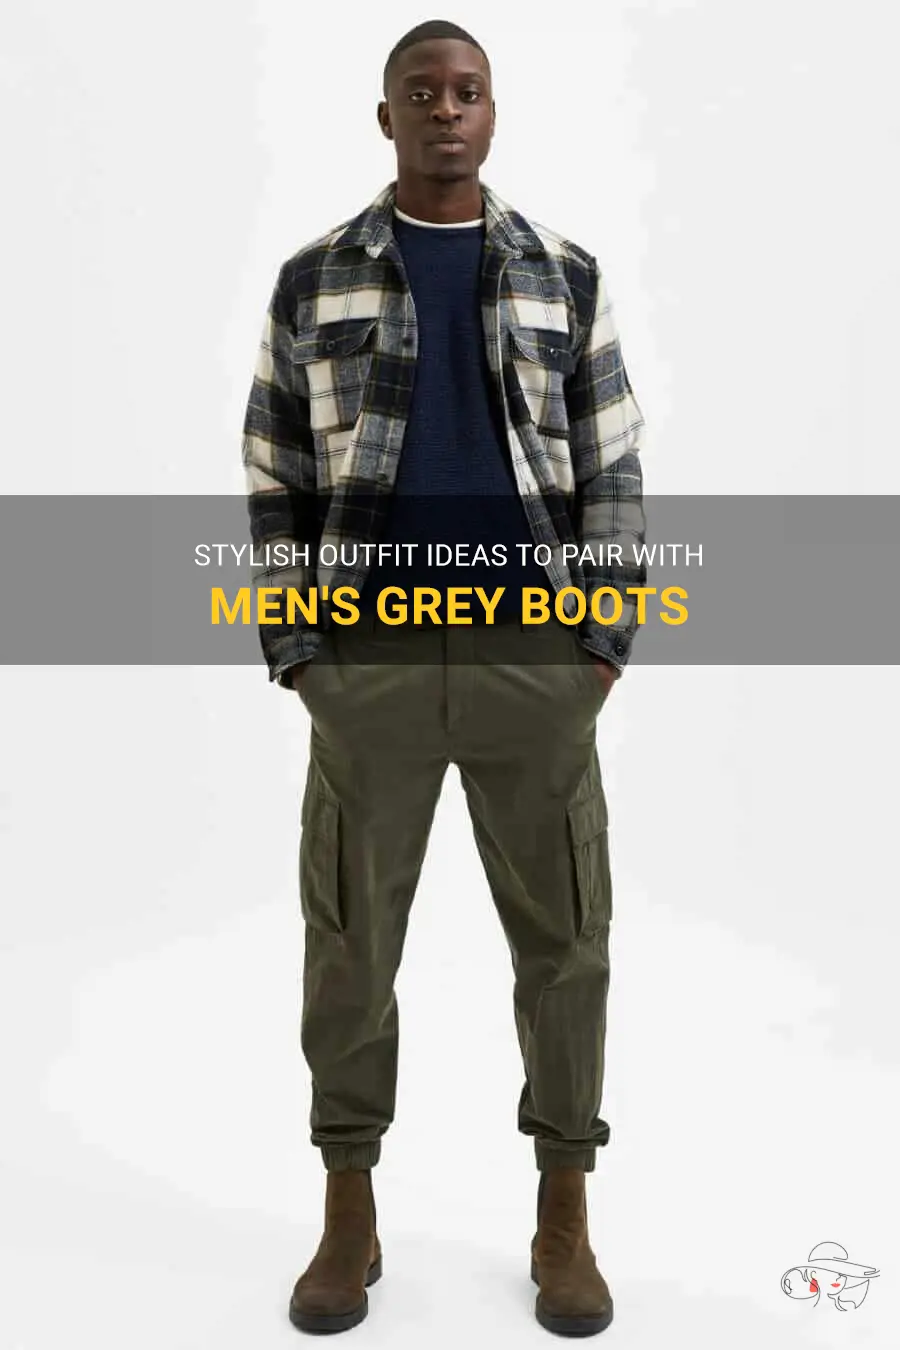 Stylish Outfit Ideas To Pair With Men's Grey Boots | ShunVogue